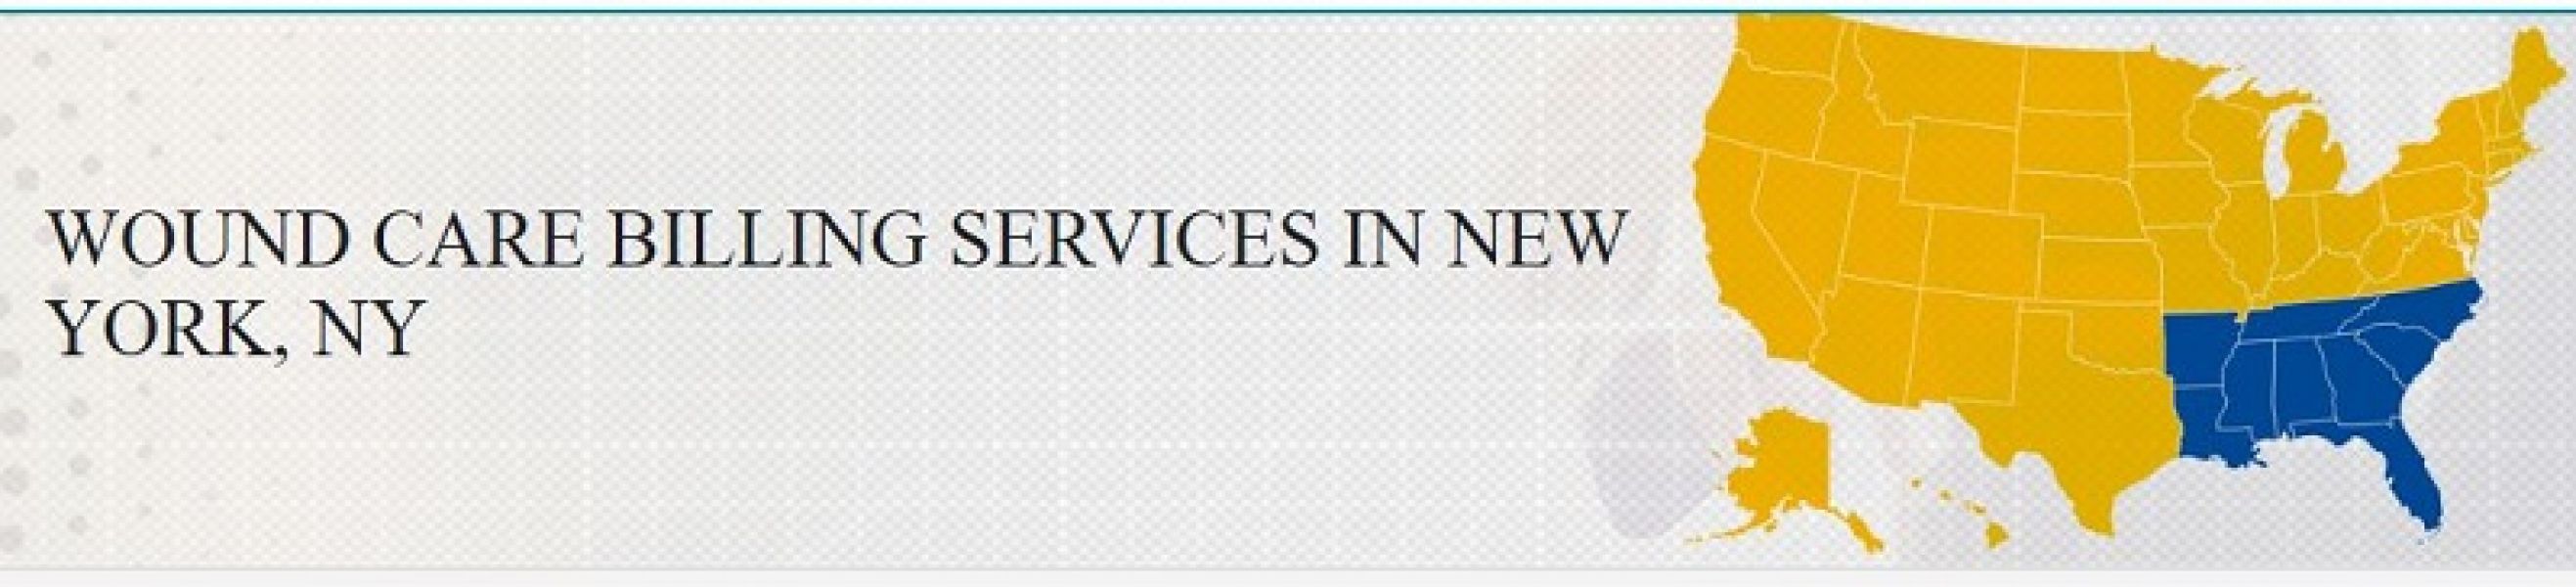 Wound Care Billing Services for New York, NY